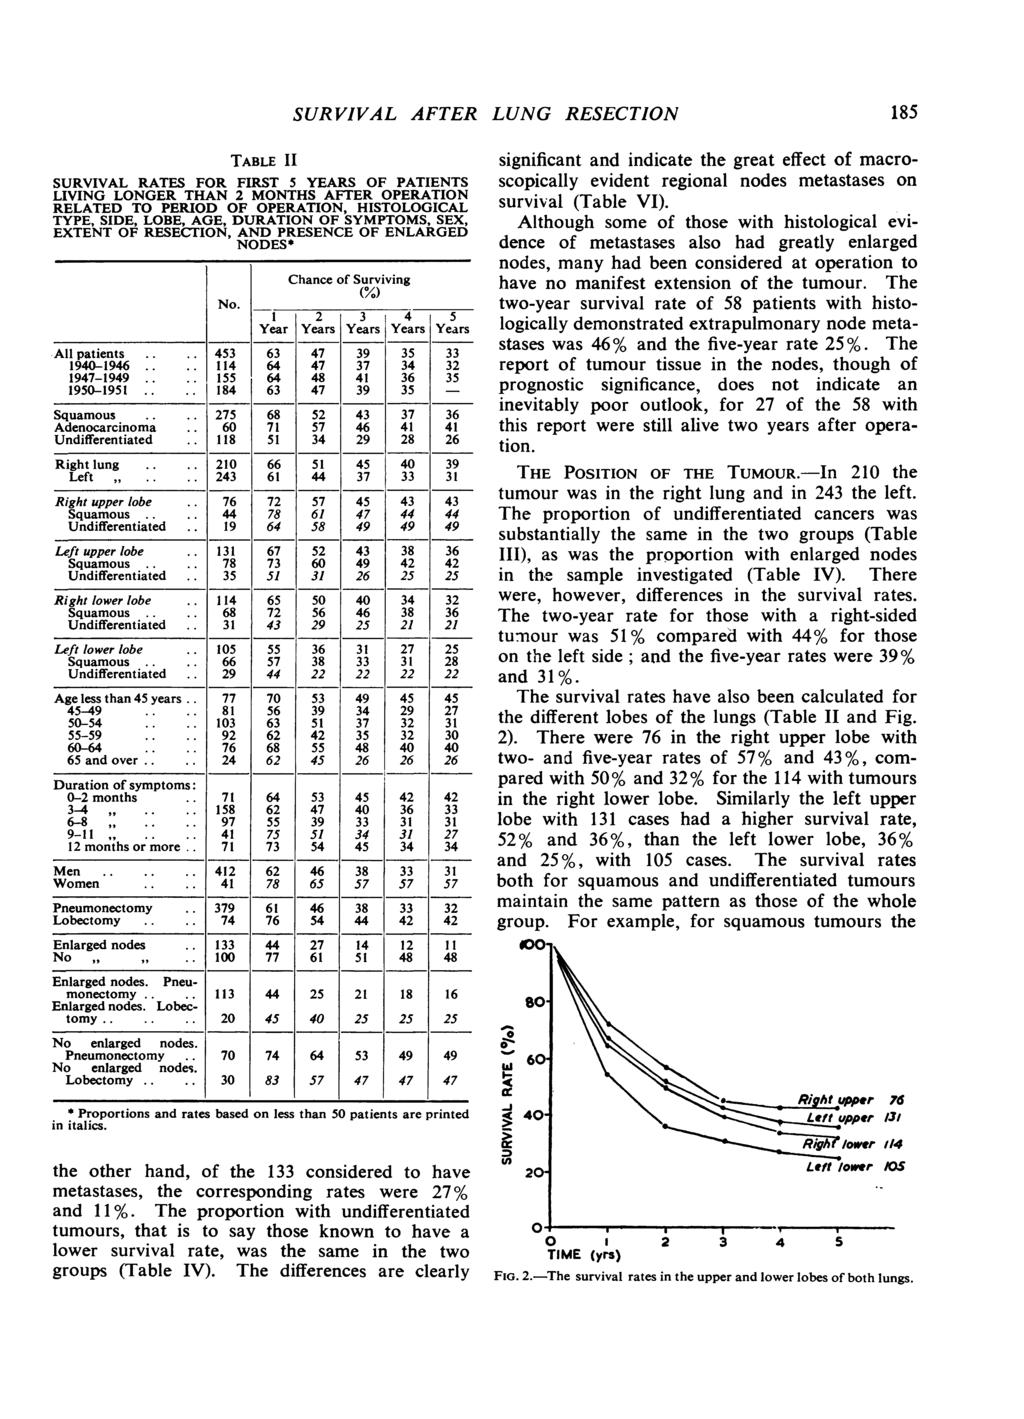 TABLE II SURVIVAL RATES FOR FIRST 5 YEARS OF PATIENTS LIVING LONGER THAN 2 MONTHS AFTER OPERATION RELATED TO PERIOD OF OPERATION, HISTOLOGICAL TYPE, SIDE, LOBE, AGE, DURATION OF SYMPTOMS, SEX, EXTENT